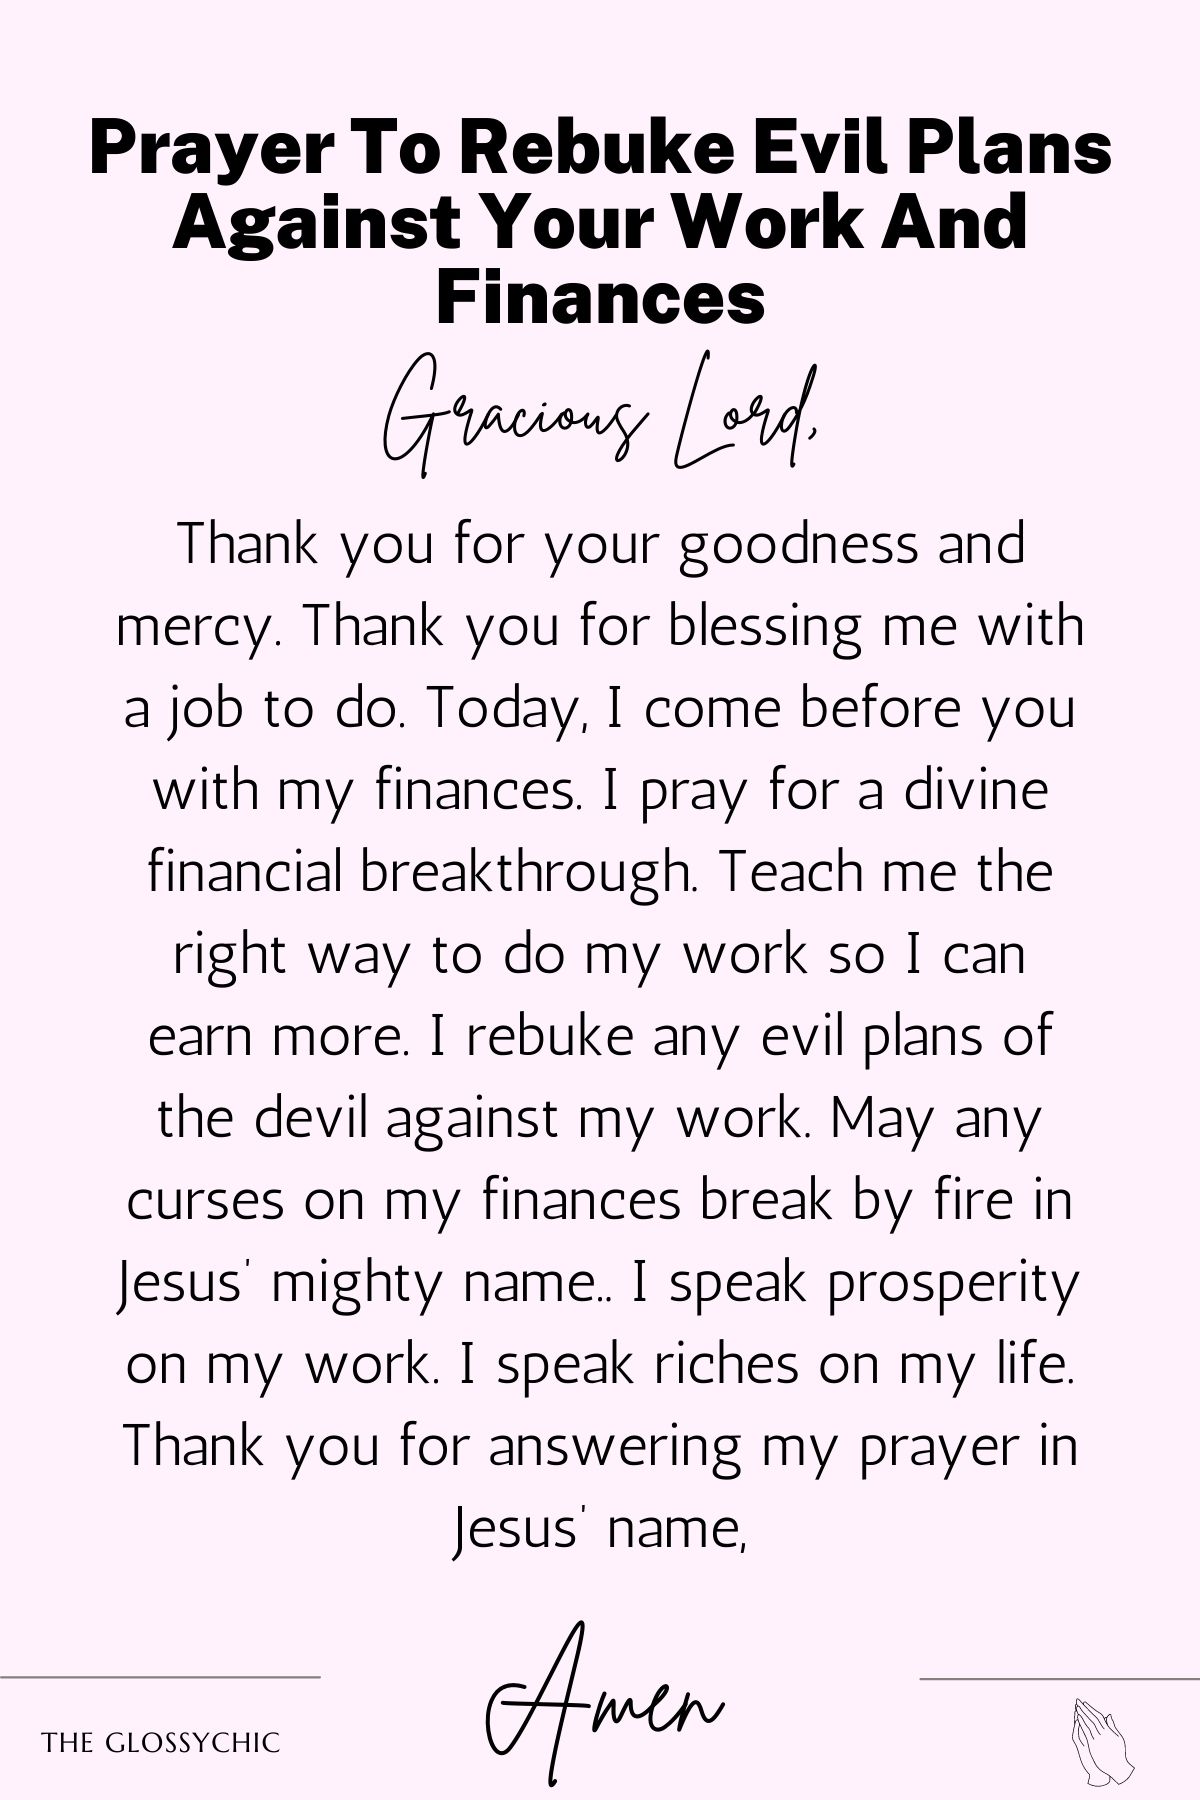 Prayer to rebuke evil plans against your work and finances